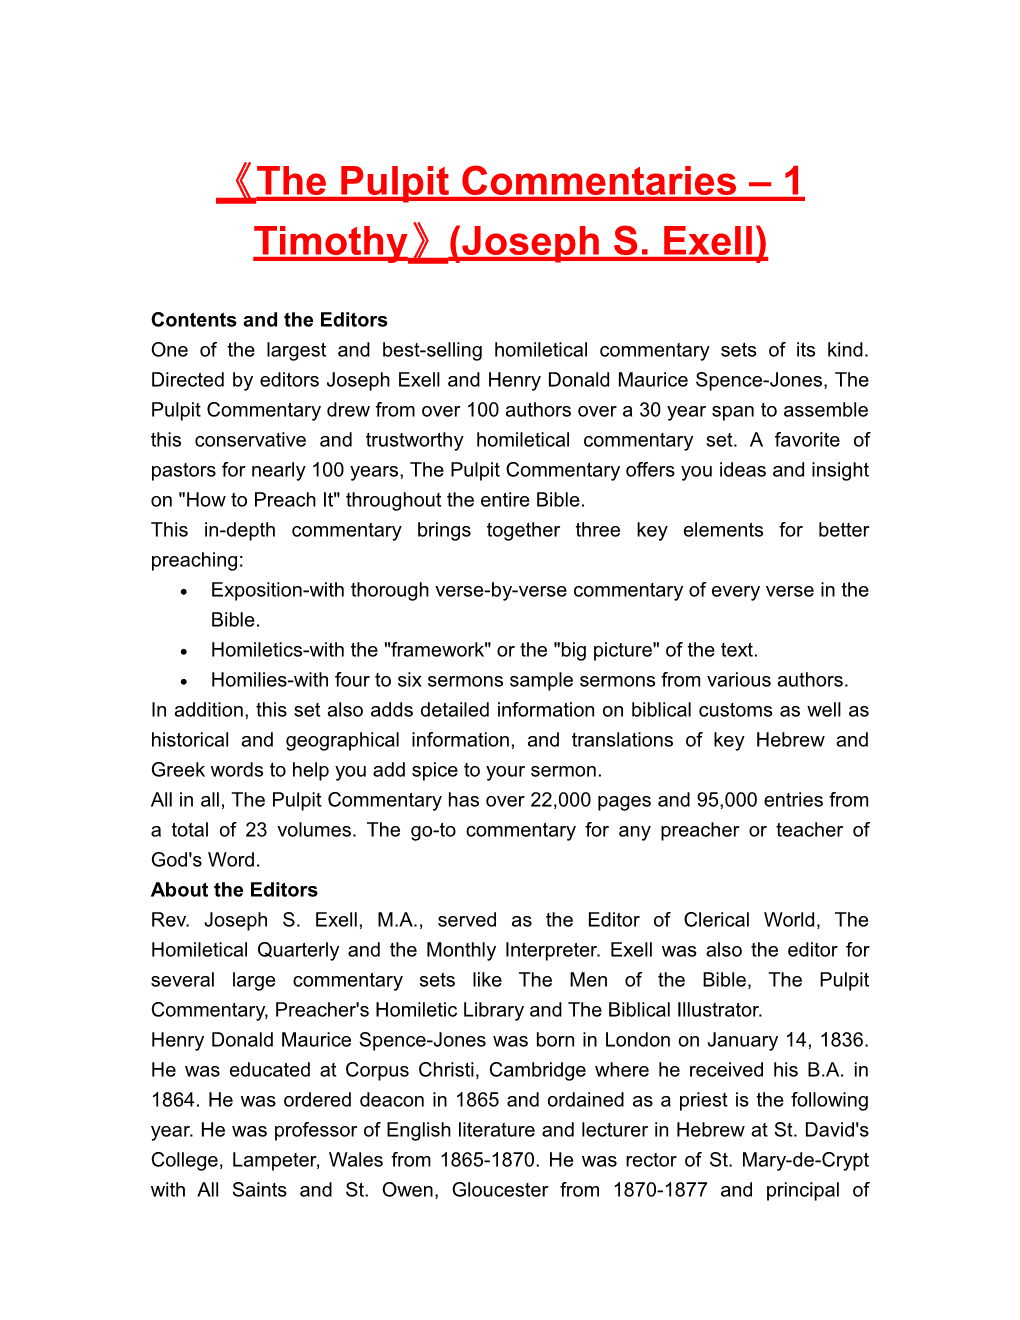 The Pulpit Commentaries 1 Timothy (Joseph S. Exell)